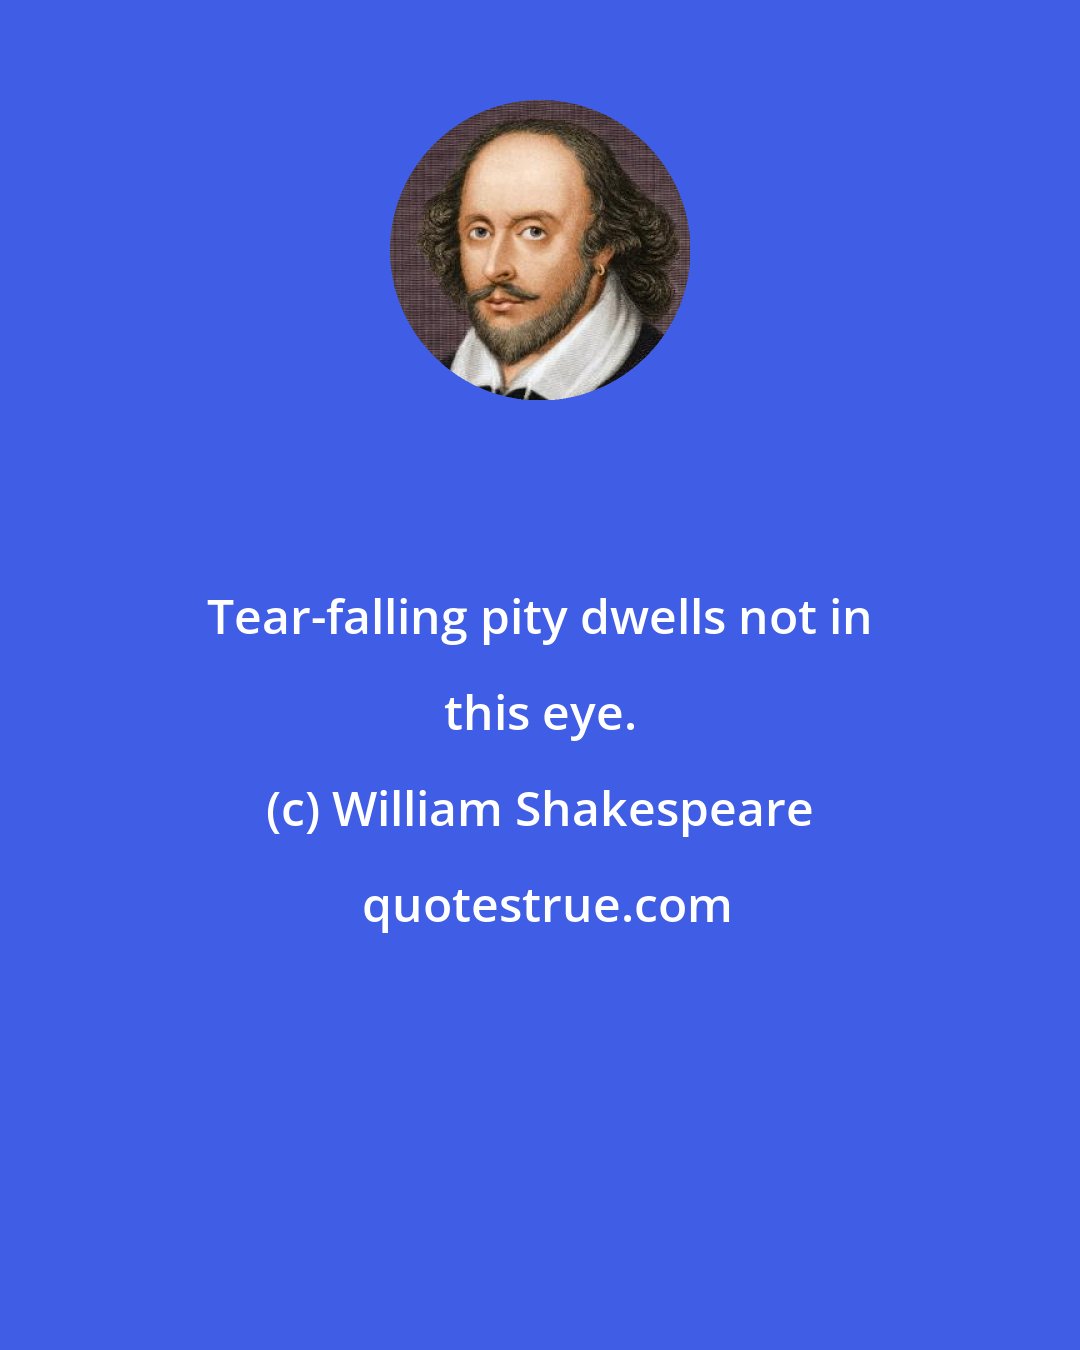 William Shakespeare: Tear-falling pity dwells not in this eye.